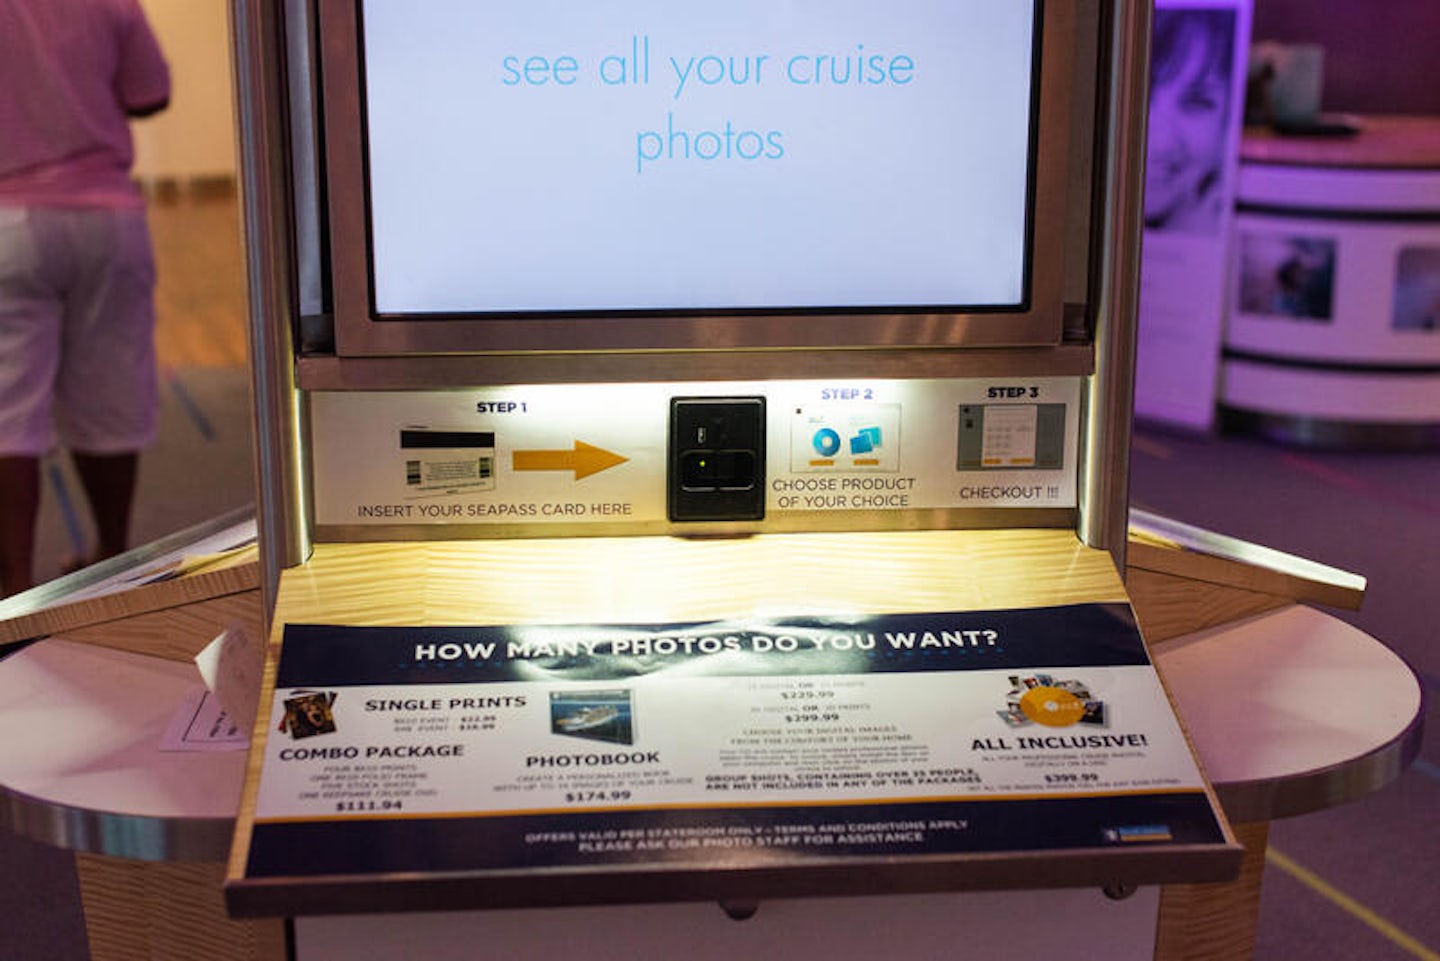 Focus Photo Gallery on Oasis of the Seas